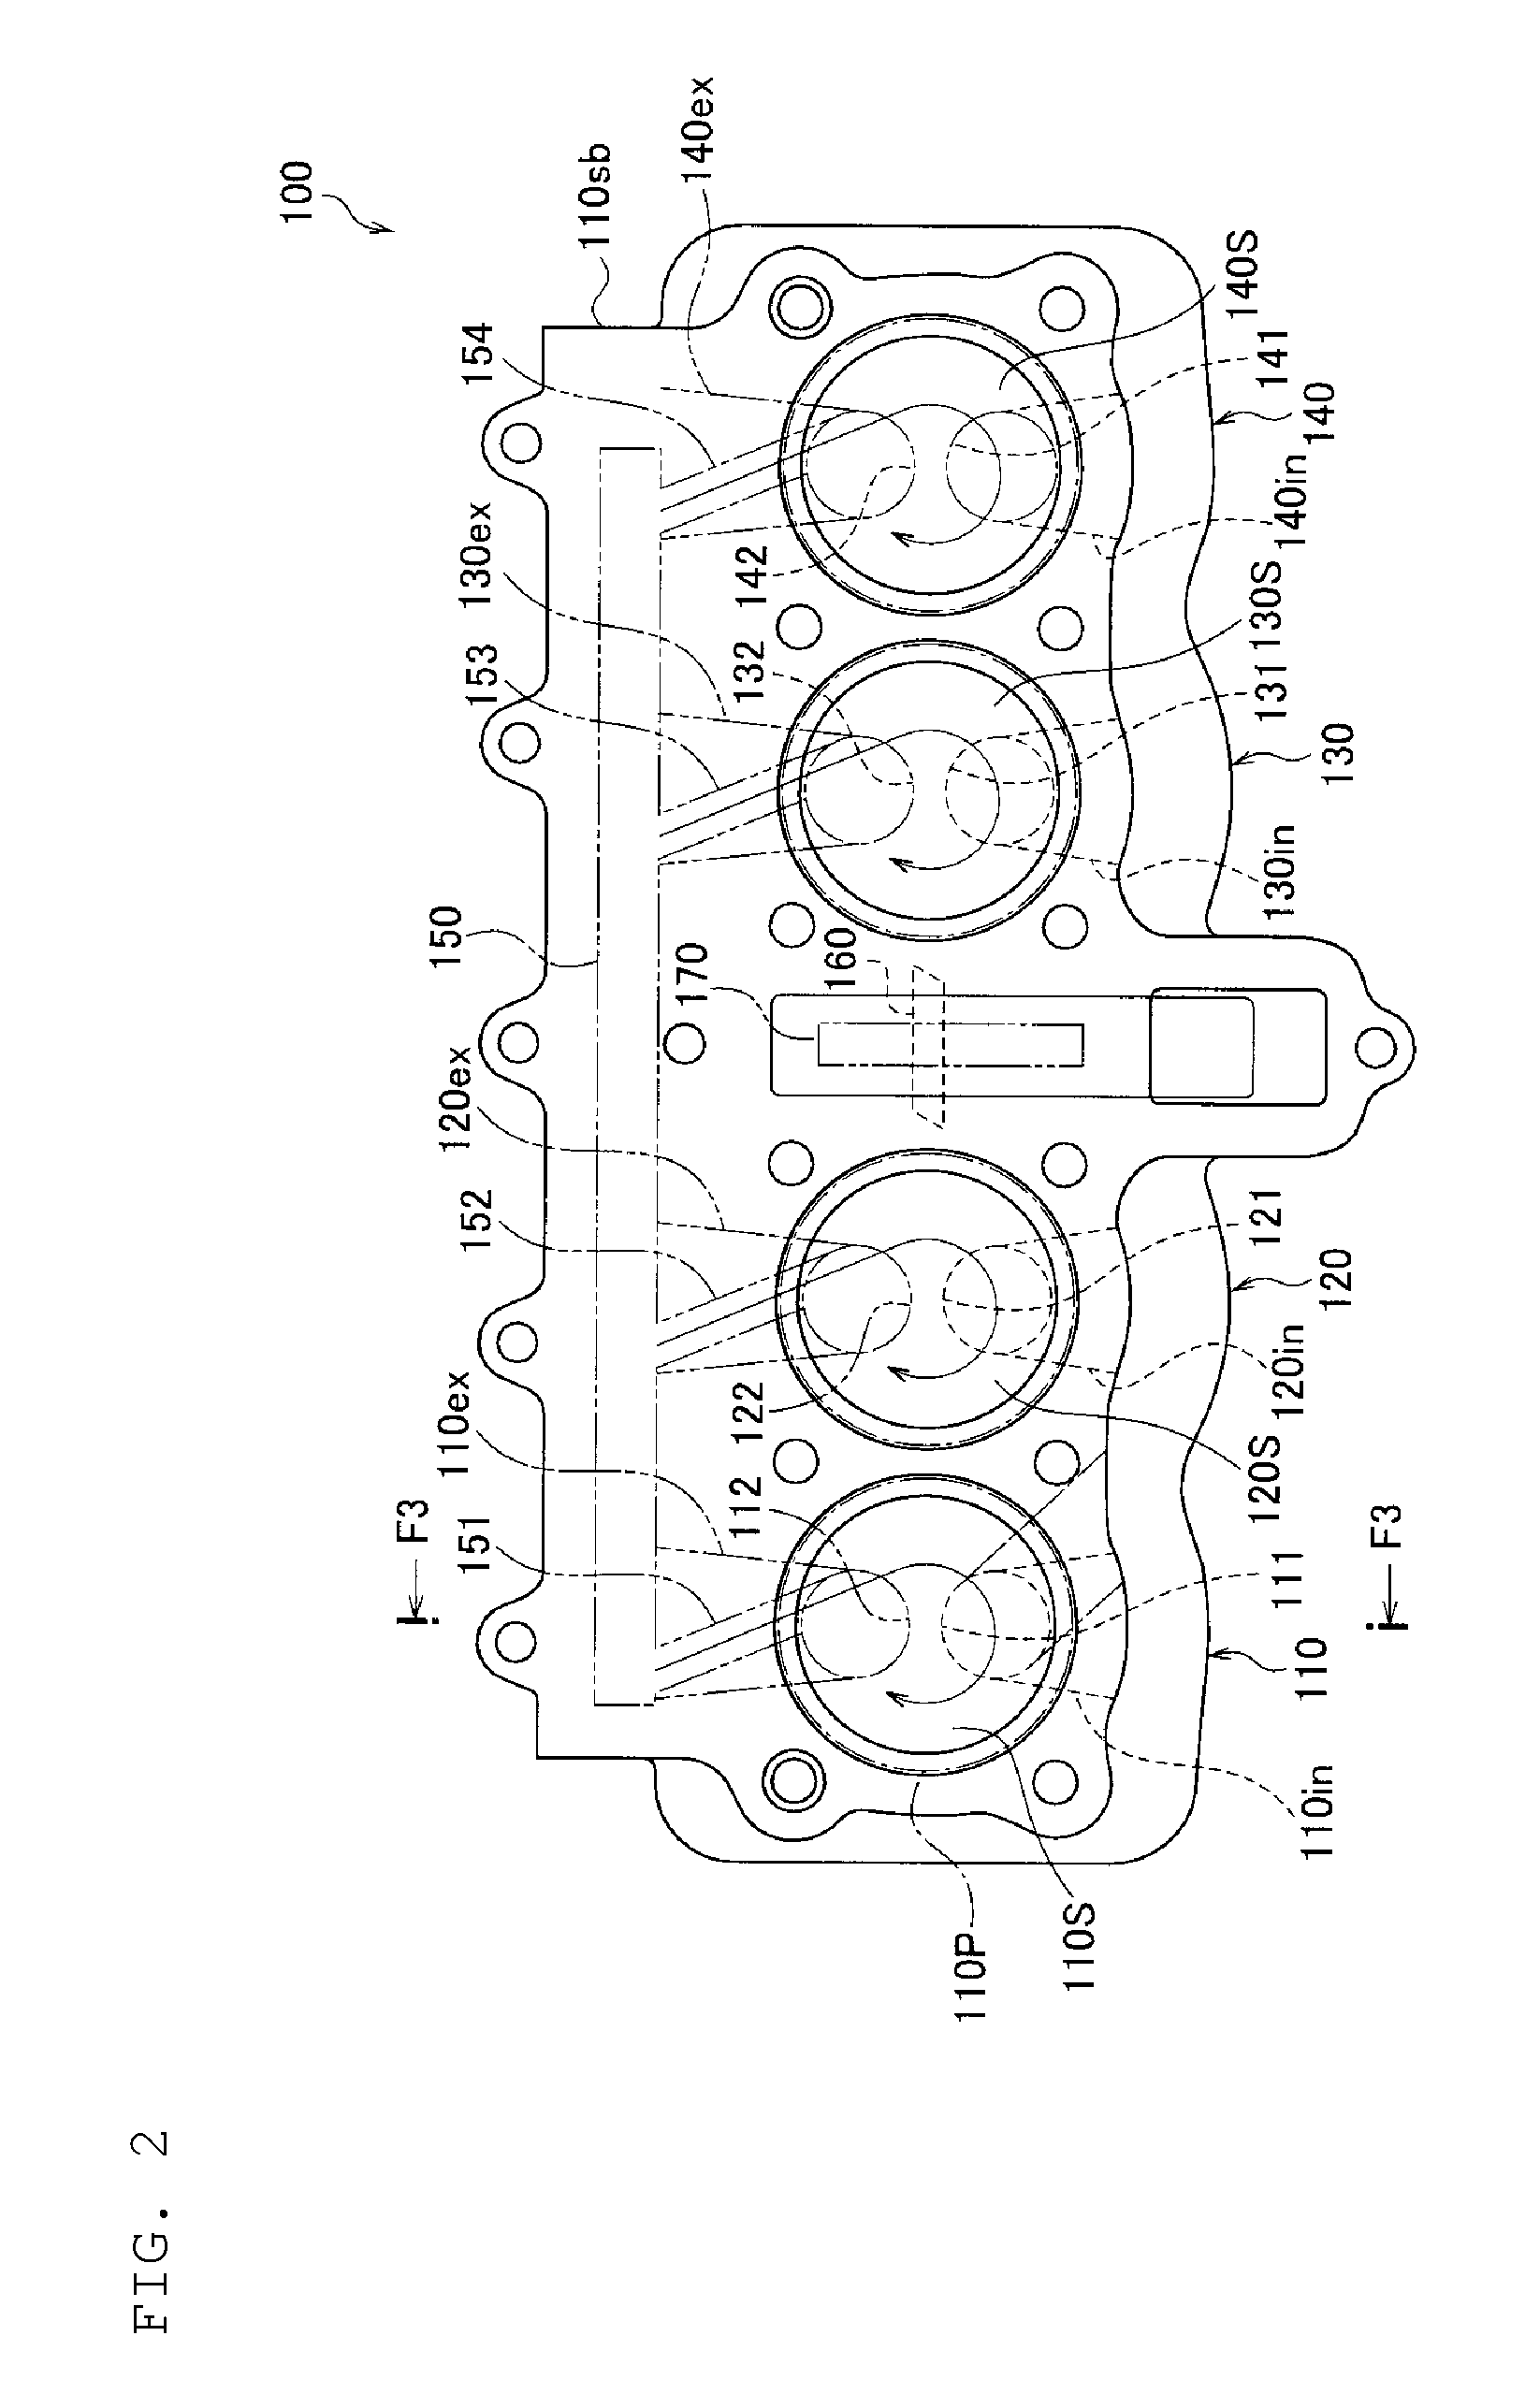 Four cycle internal combustion engine and vehicle